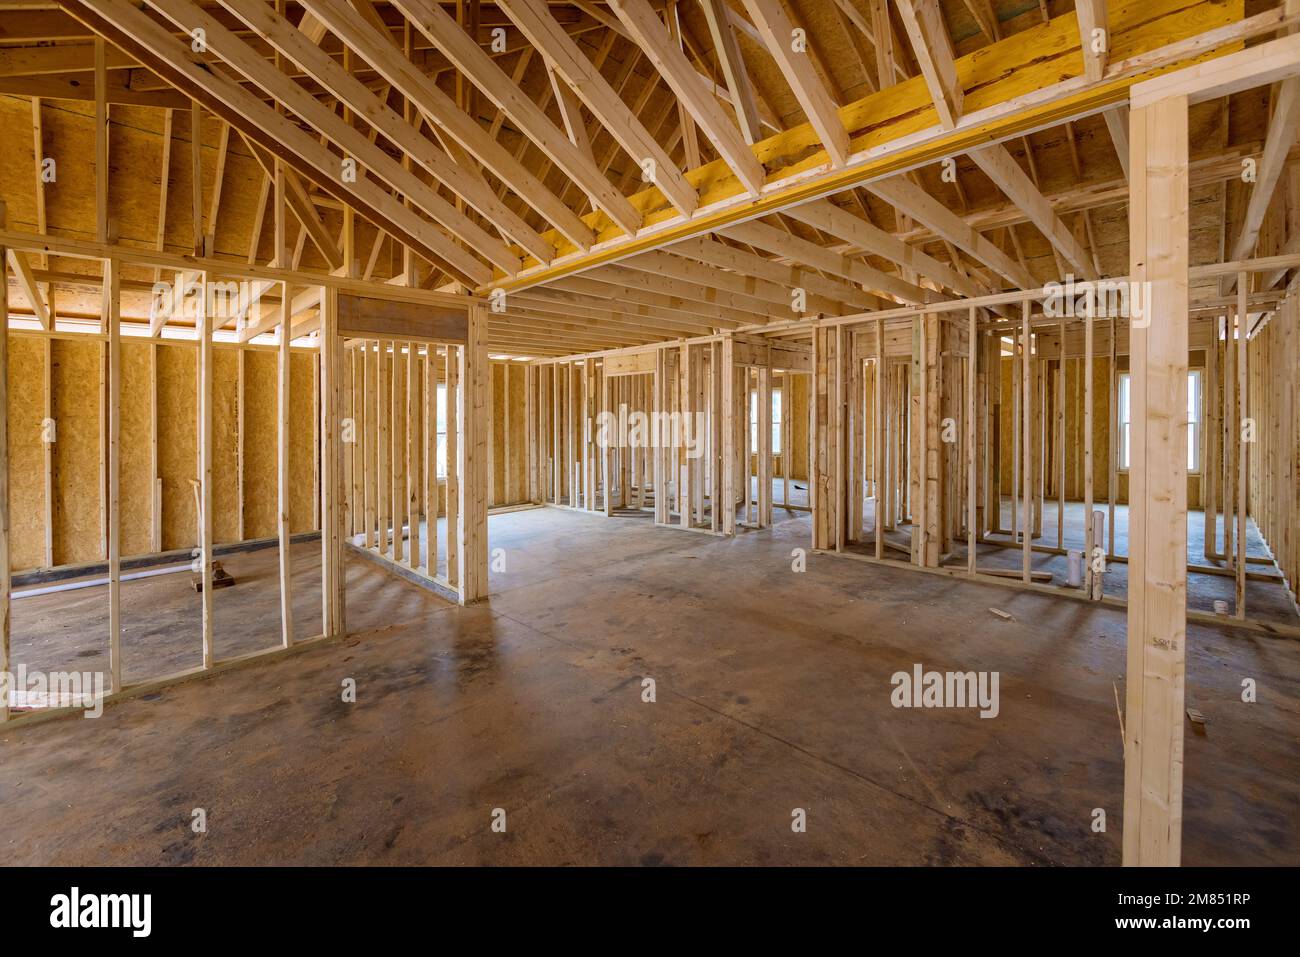 This an interior framing newly constructed house under construction, which is framed with truss beams Stock Photo